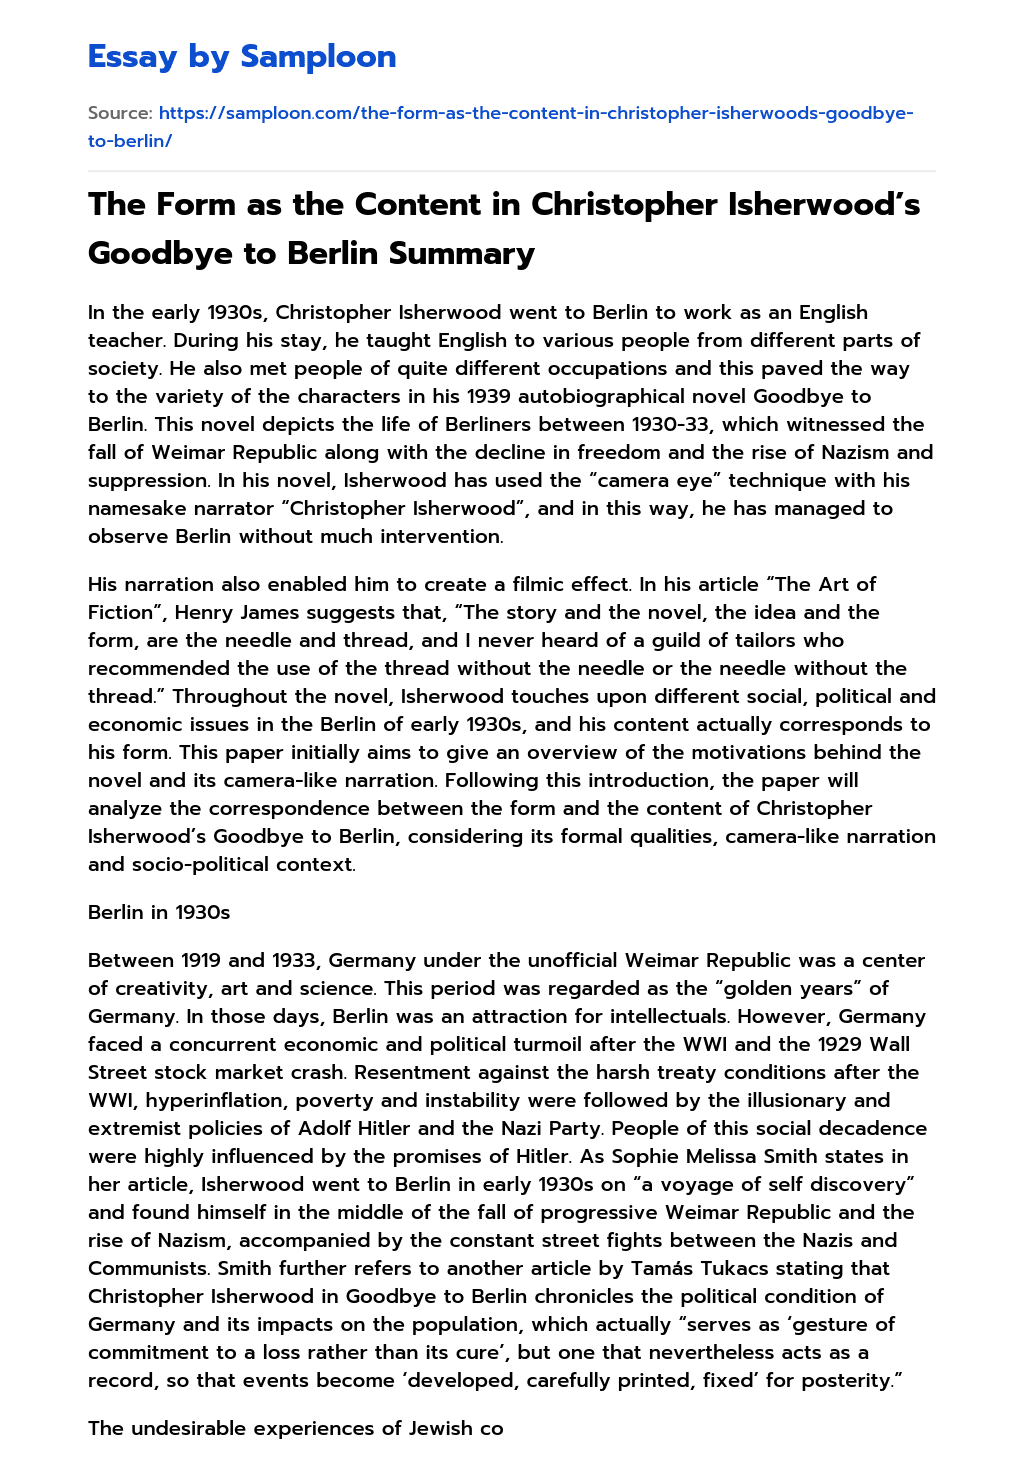 The Form as the Content in Christopher Isherwood’s Goodbye to Berlin Summary essay